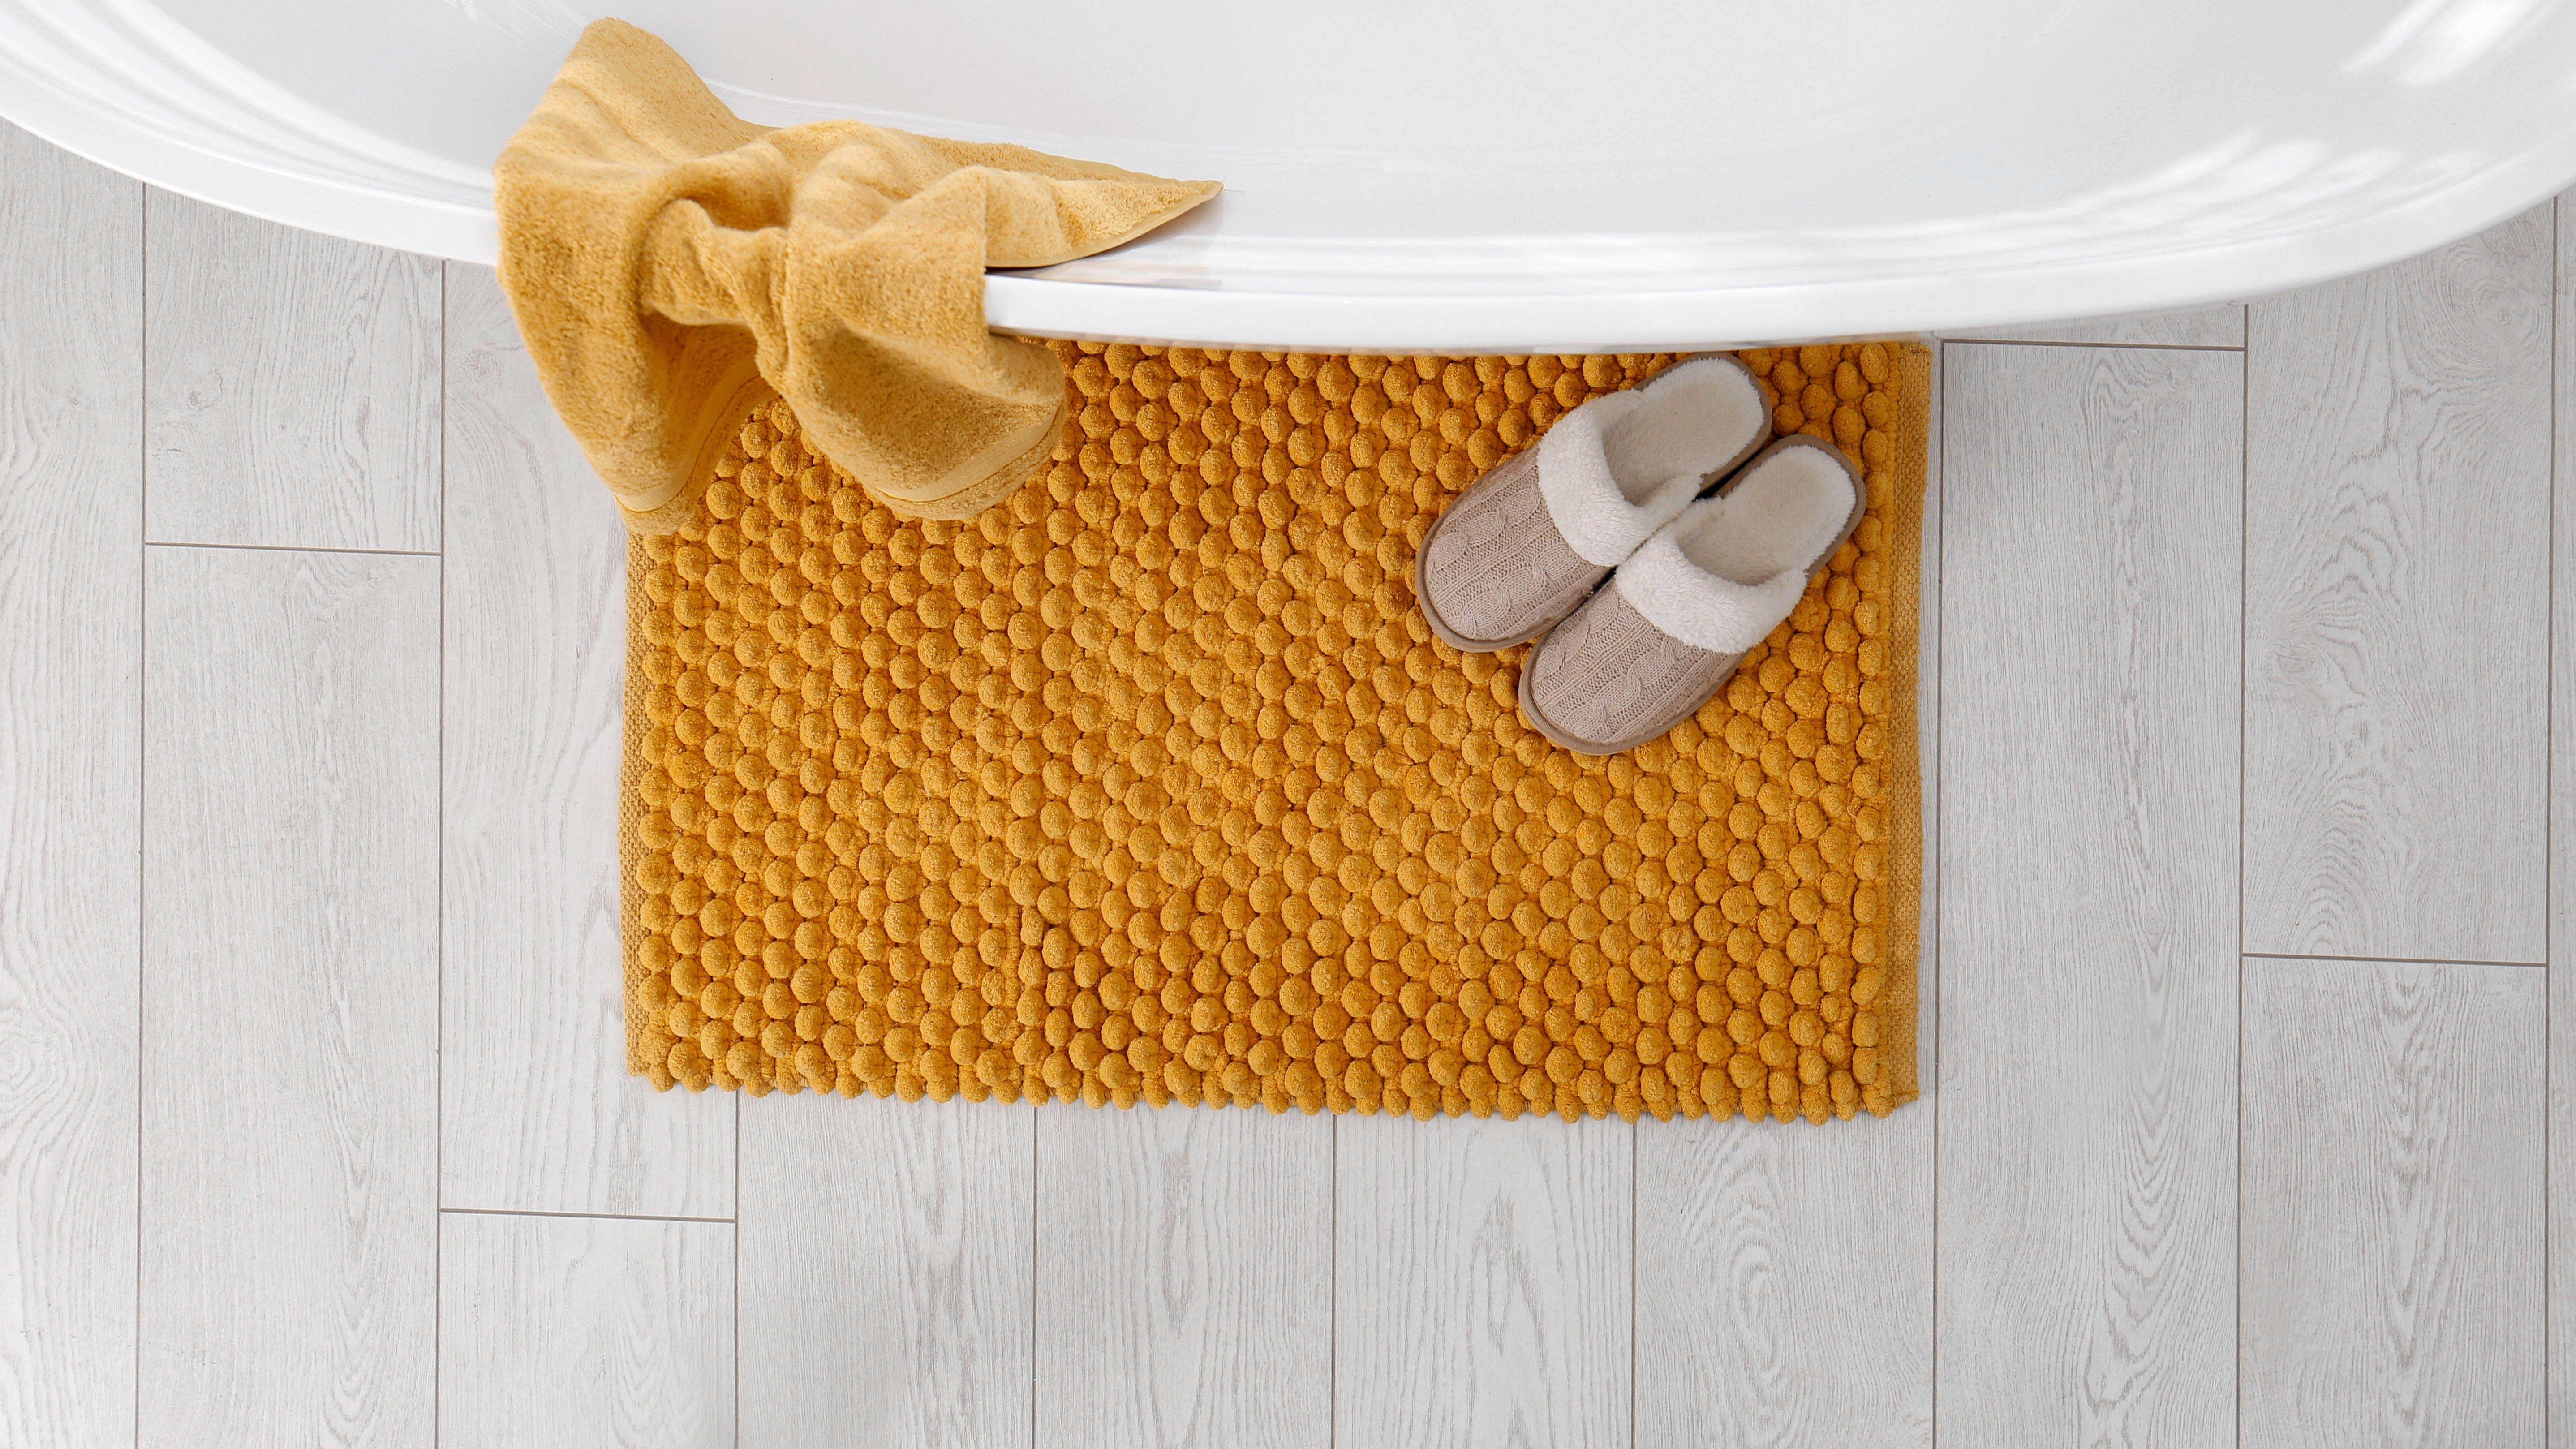 A yellow bath mat next to the bath tub with a pair of slippers and a towel